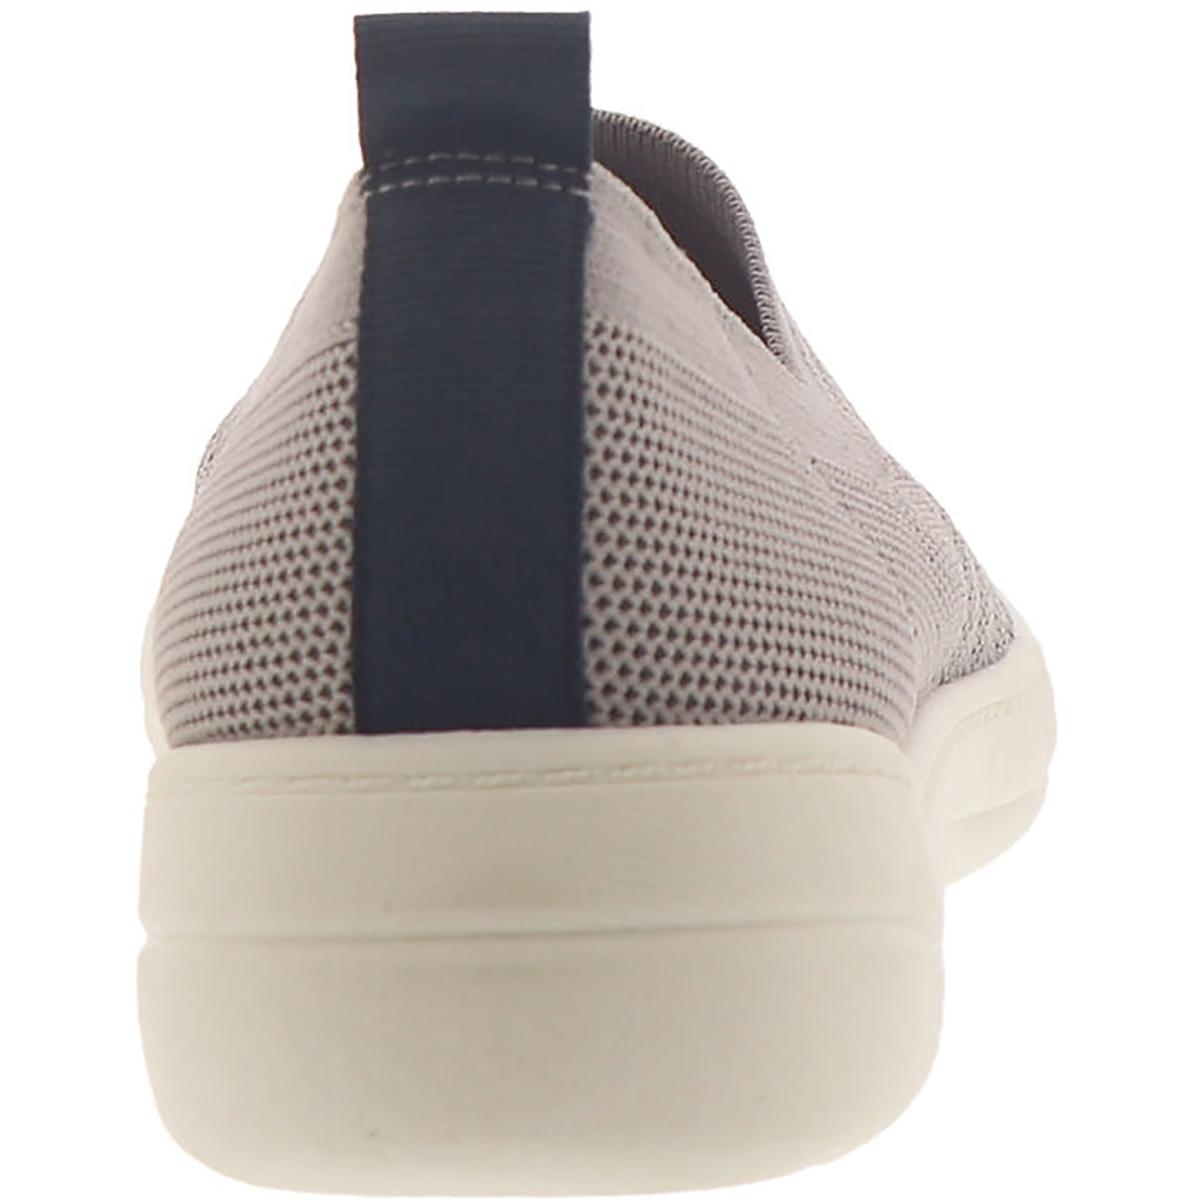 Life Stride Velocity 2.0 Women's Energy Knit Slip-On Sneakers Greige/Gray  6M Size 6 - $38 New With Tags - From Lynn